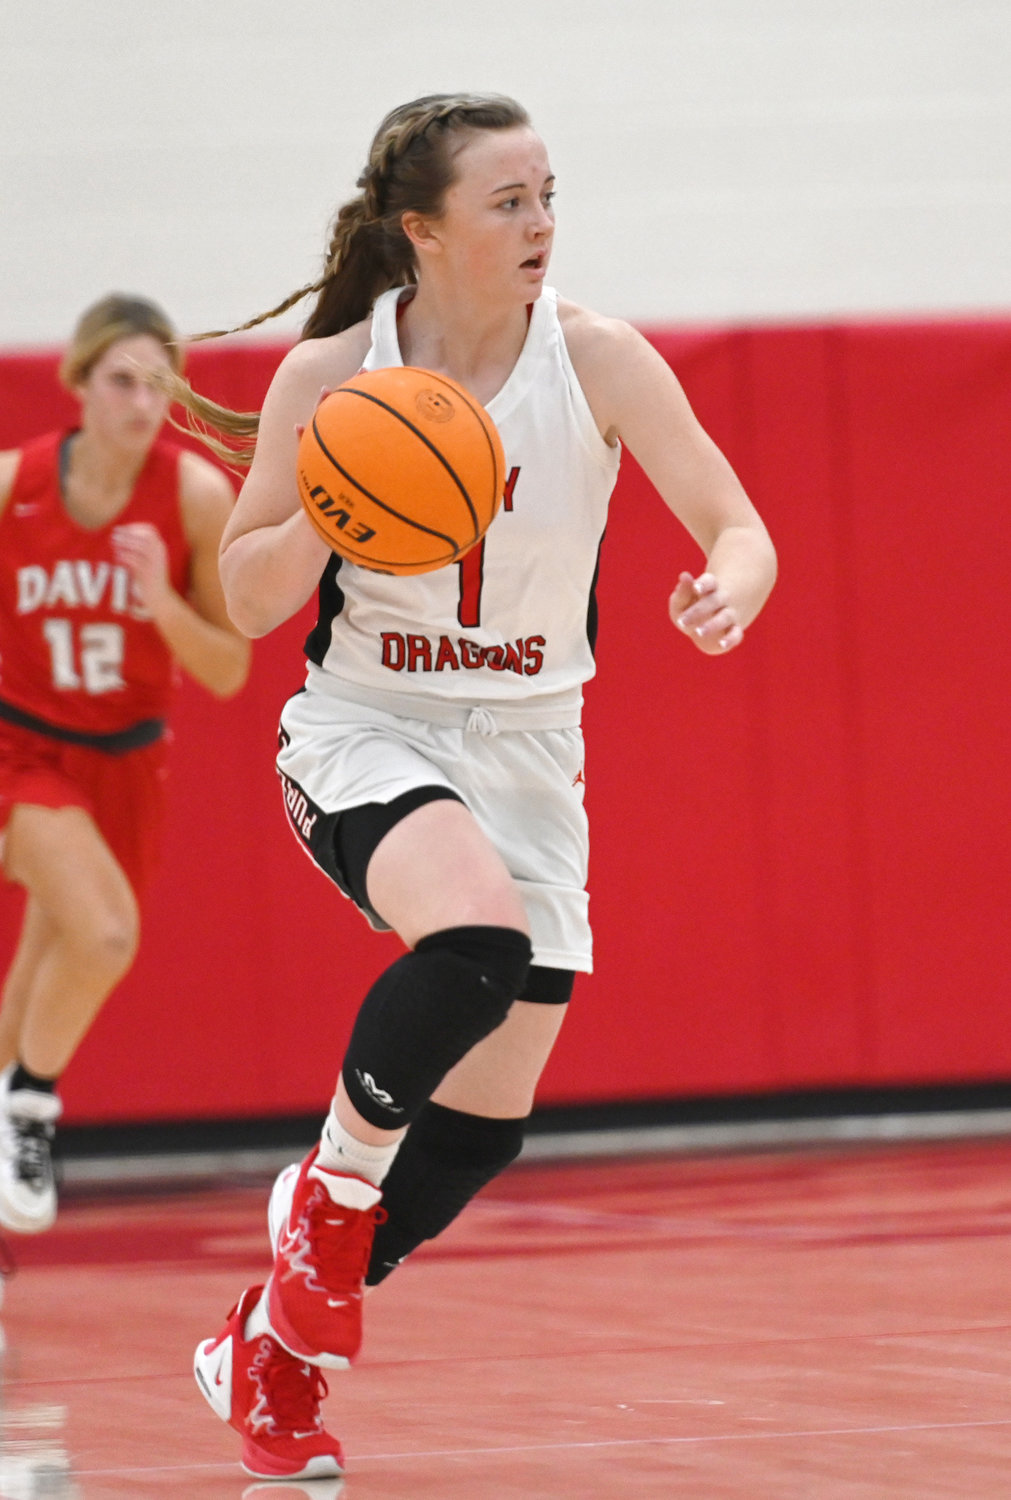 Purcell senior Lauren Holmes runs out on a fast break during the Dragons’ 43-31 win over Davis. Purcell hosts Lexington Friday at 6:30 p.m.